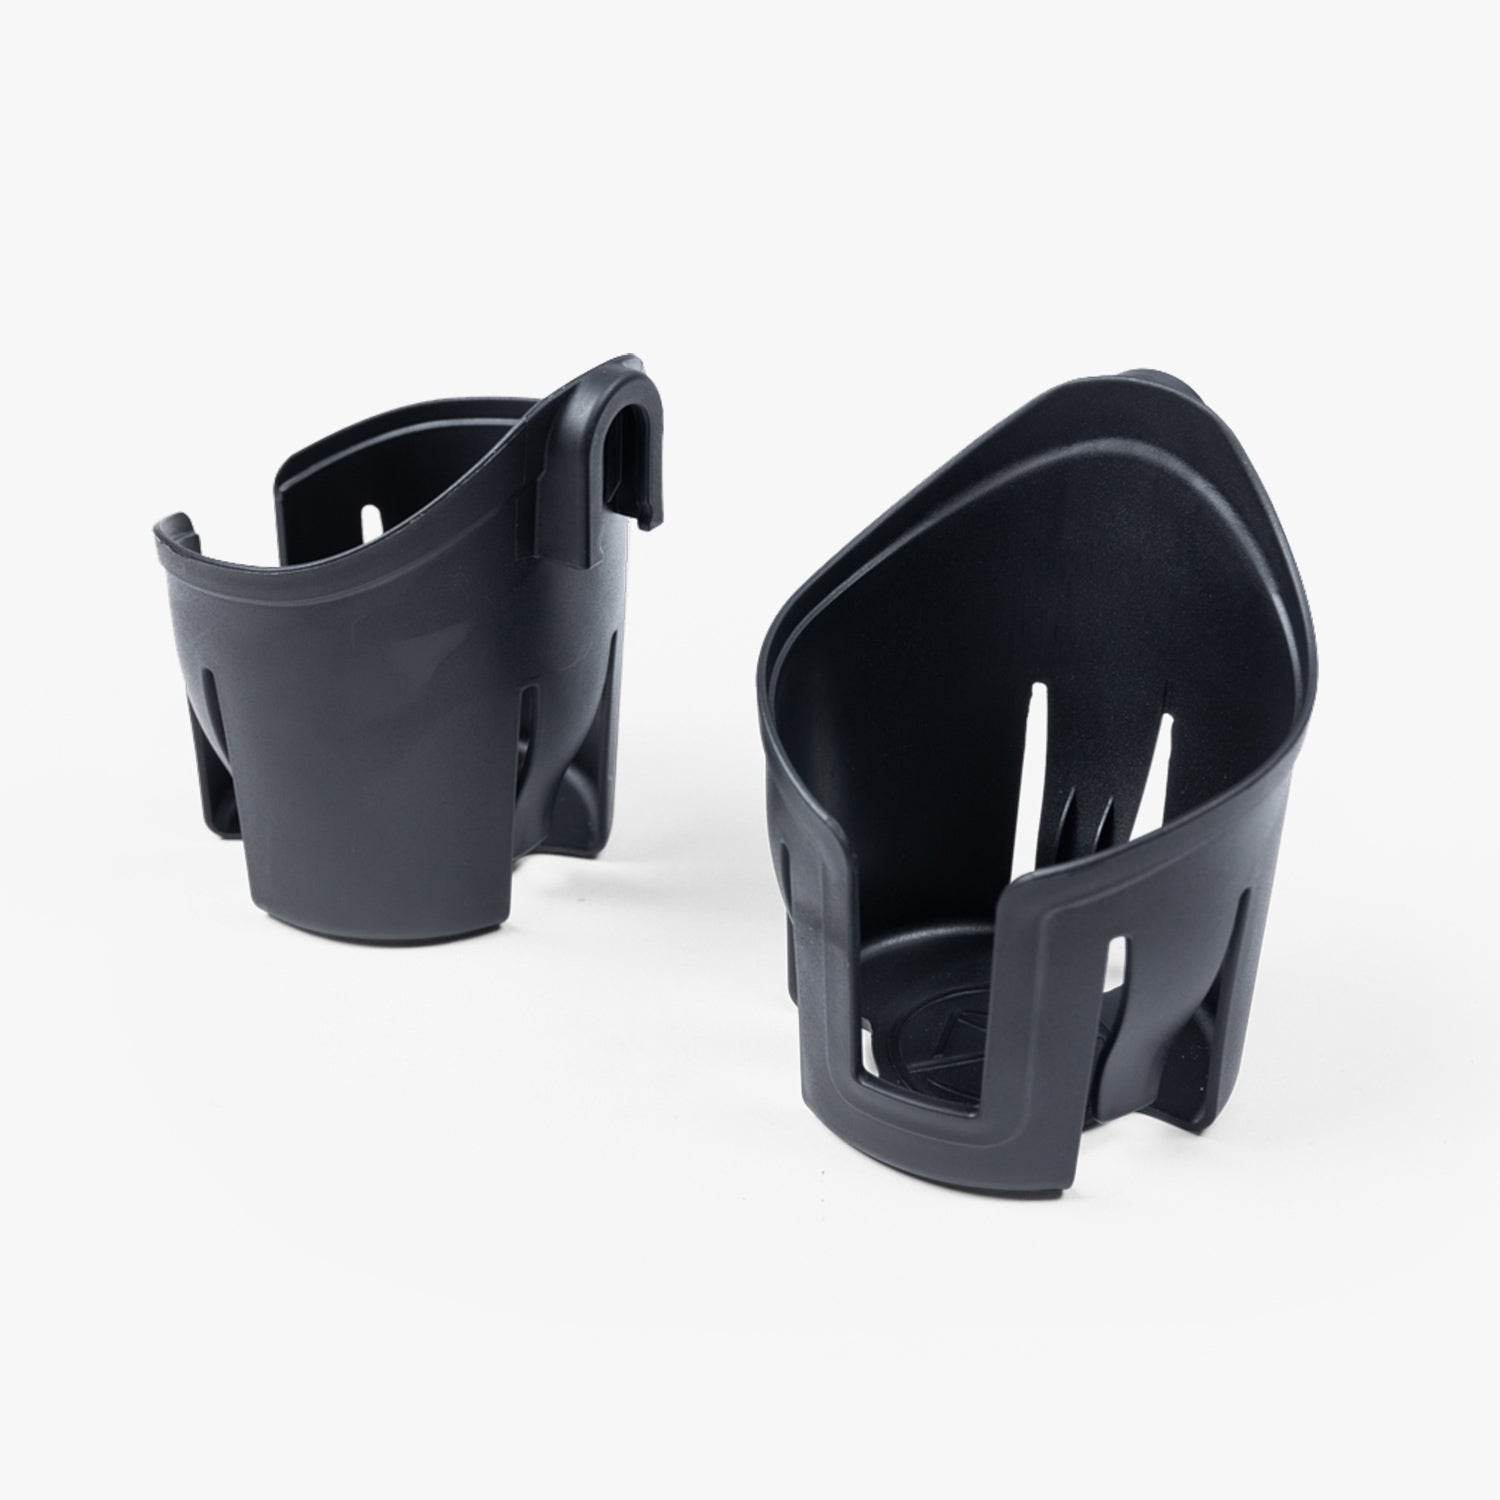 S-1 Cup Holders (2pk)